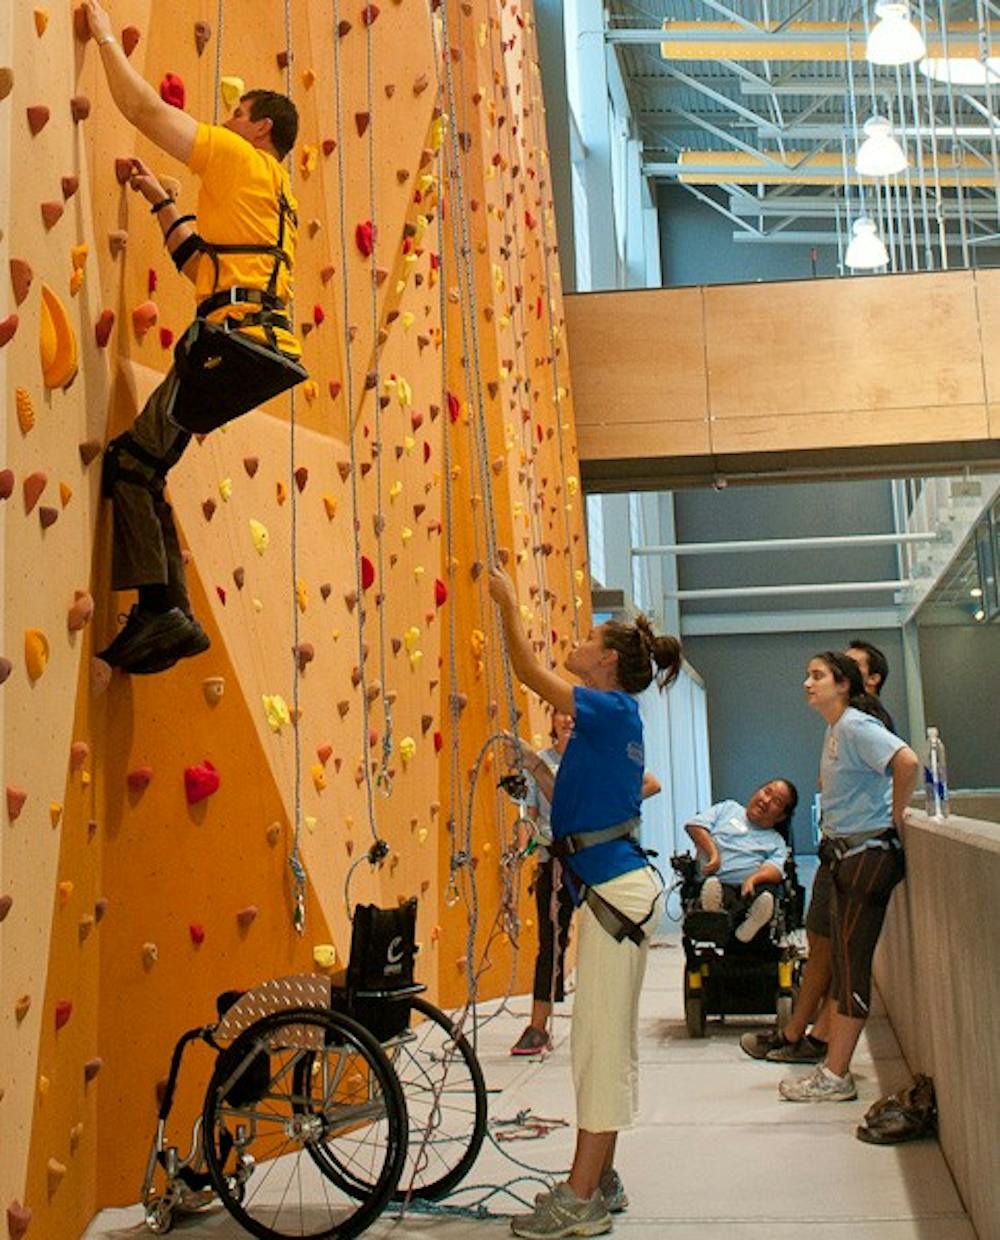 The rock wall at the Virginia G. Piper Sports & Fitness Center. Photo from spofit.org.